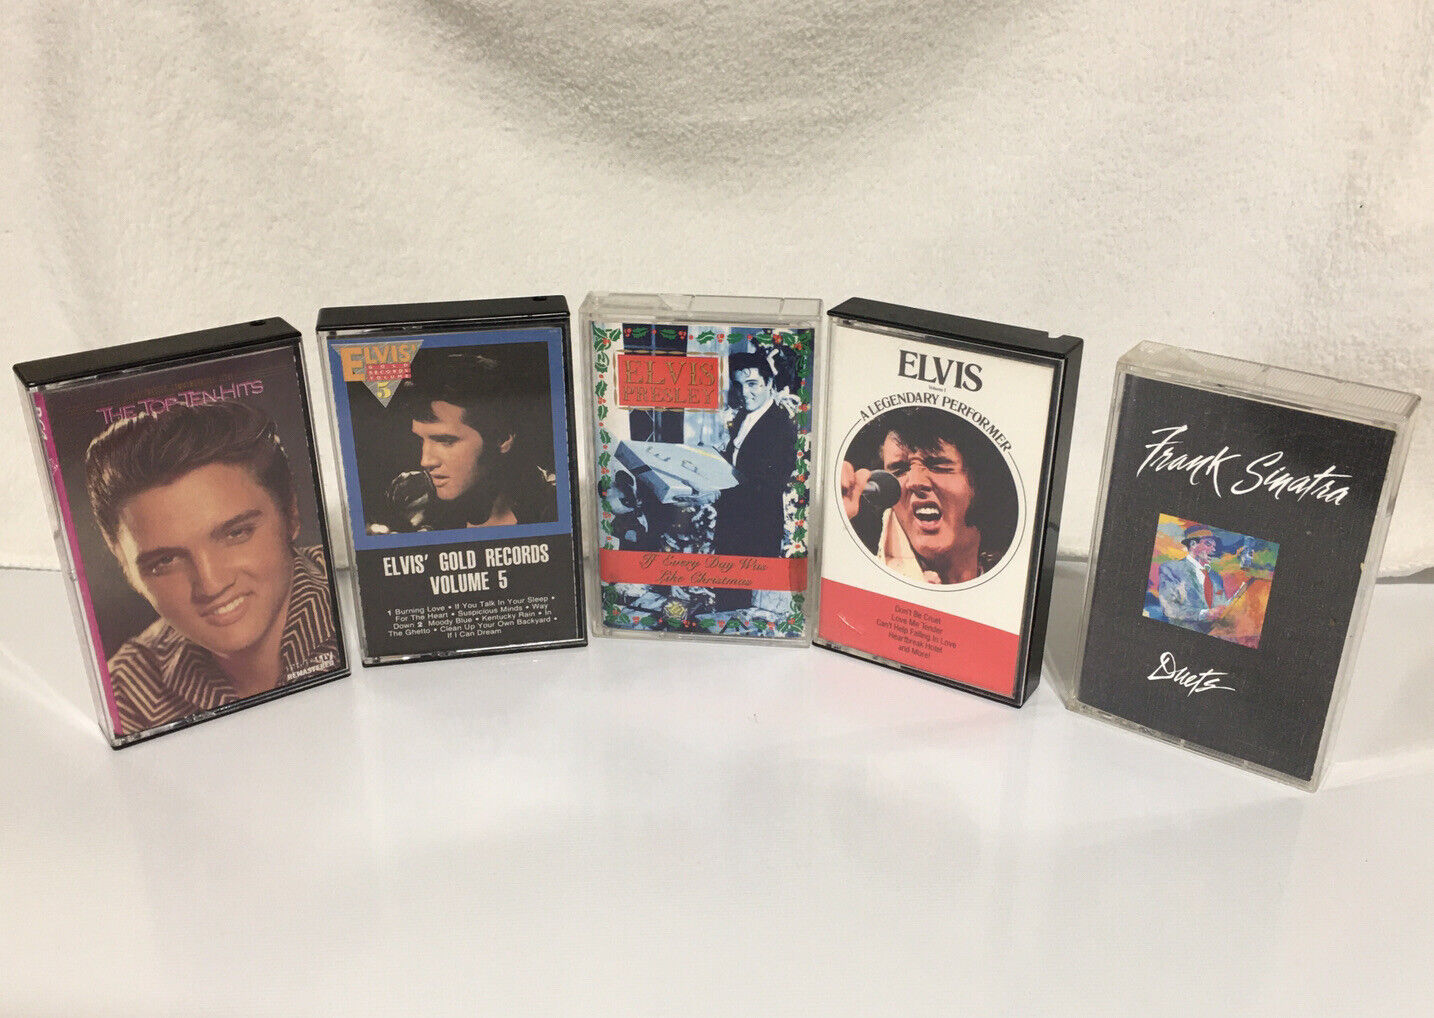 Gifts Lot of 4 ELVIS PRESLEY 1 Tapes Sinatra Frank price Audio Cassette